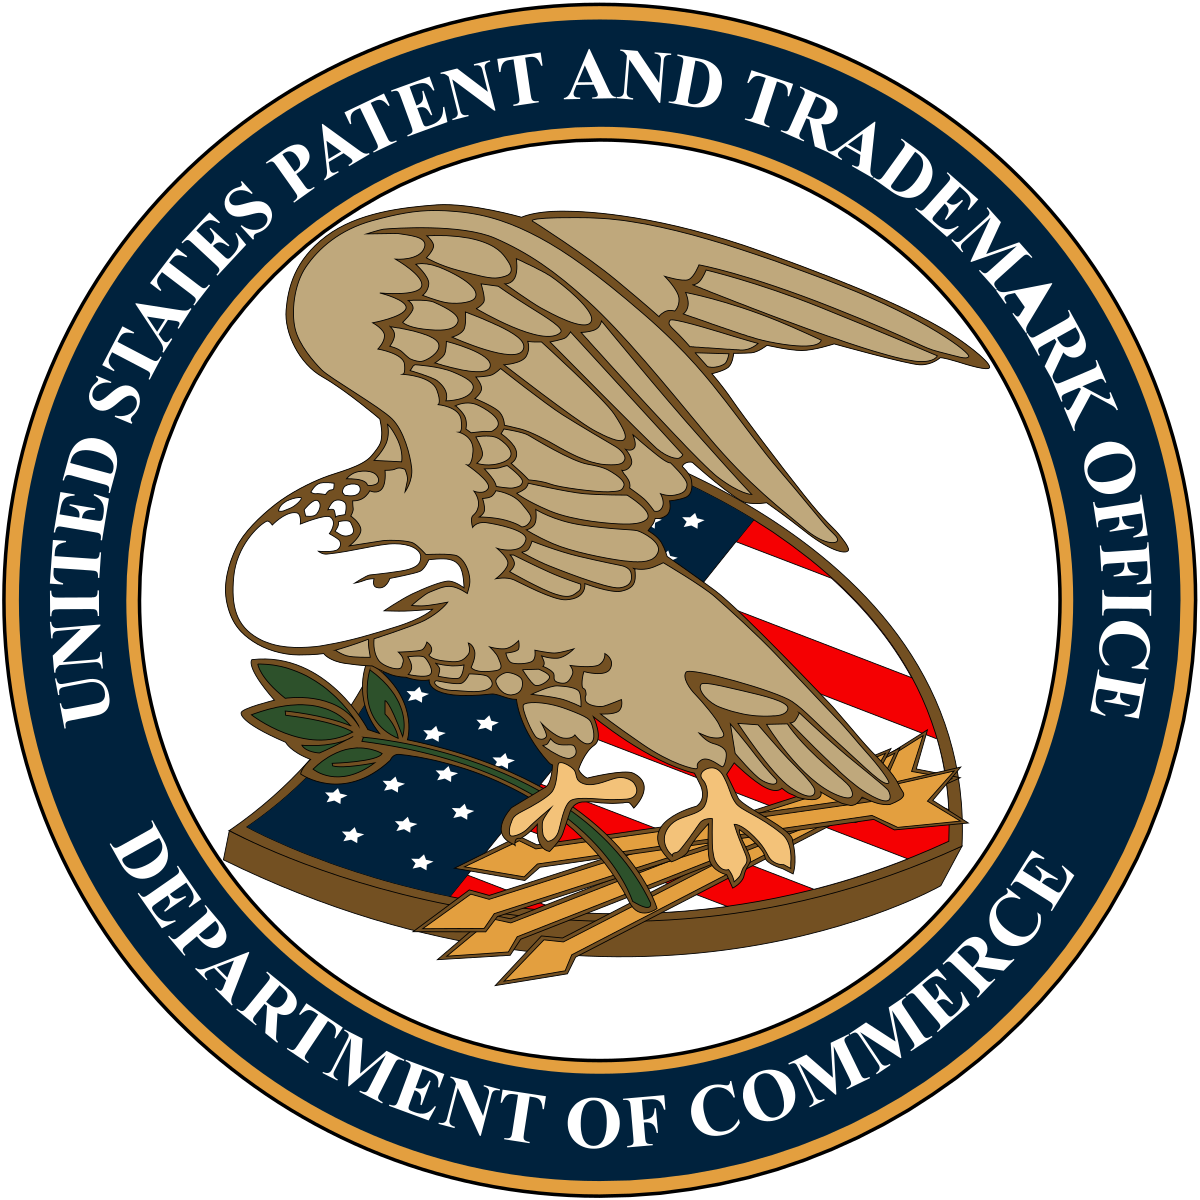 1200px-Seal_of_the_United_States_Patent_and_Trademark_Office.svg